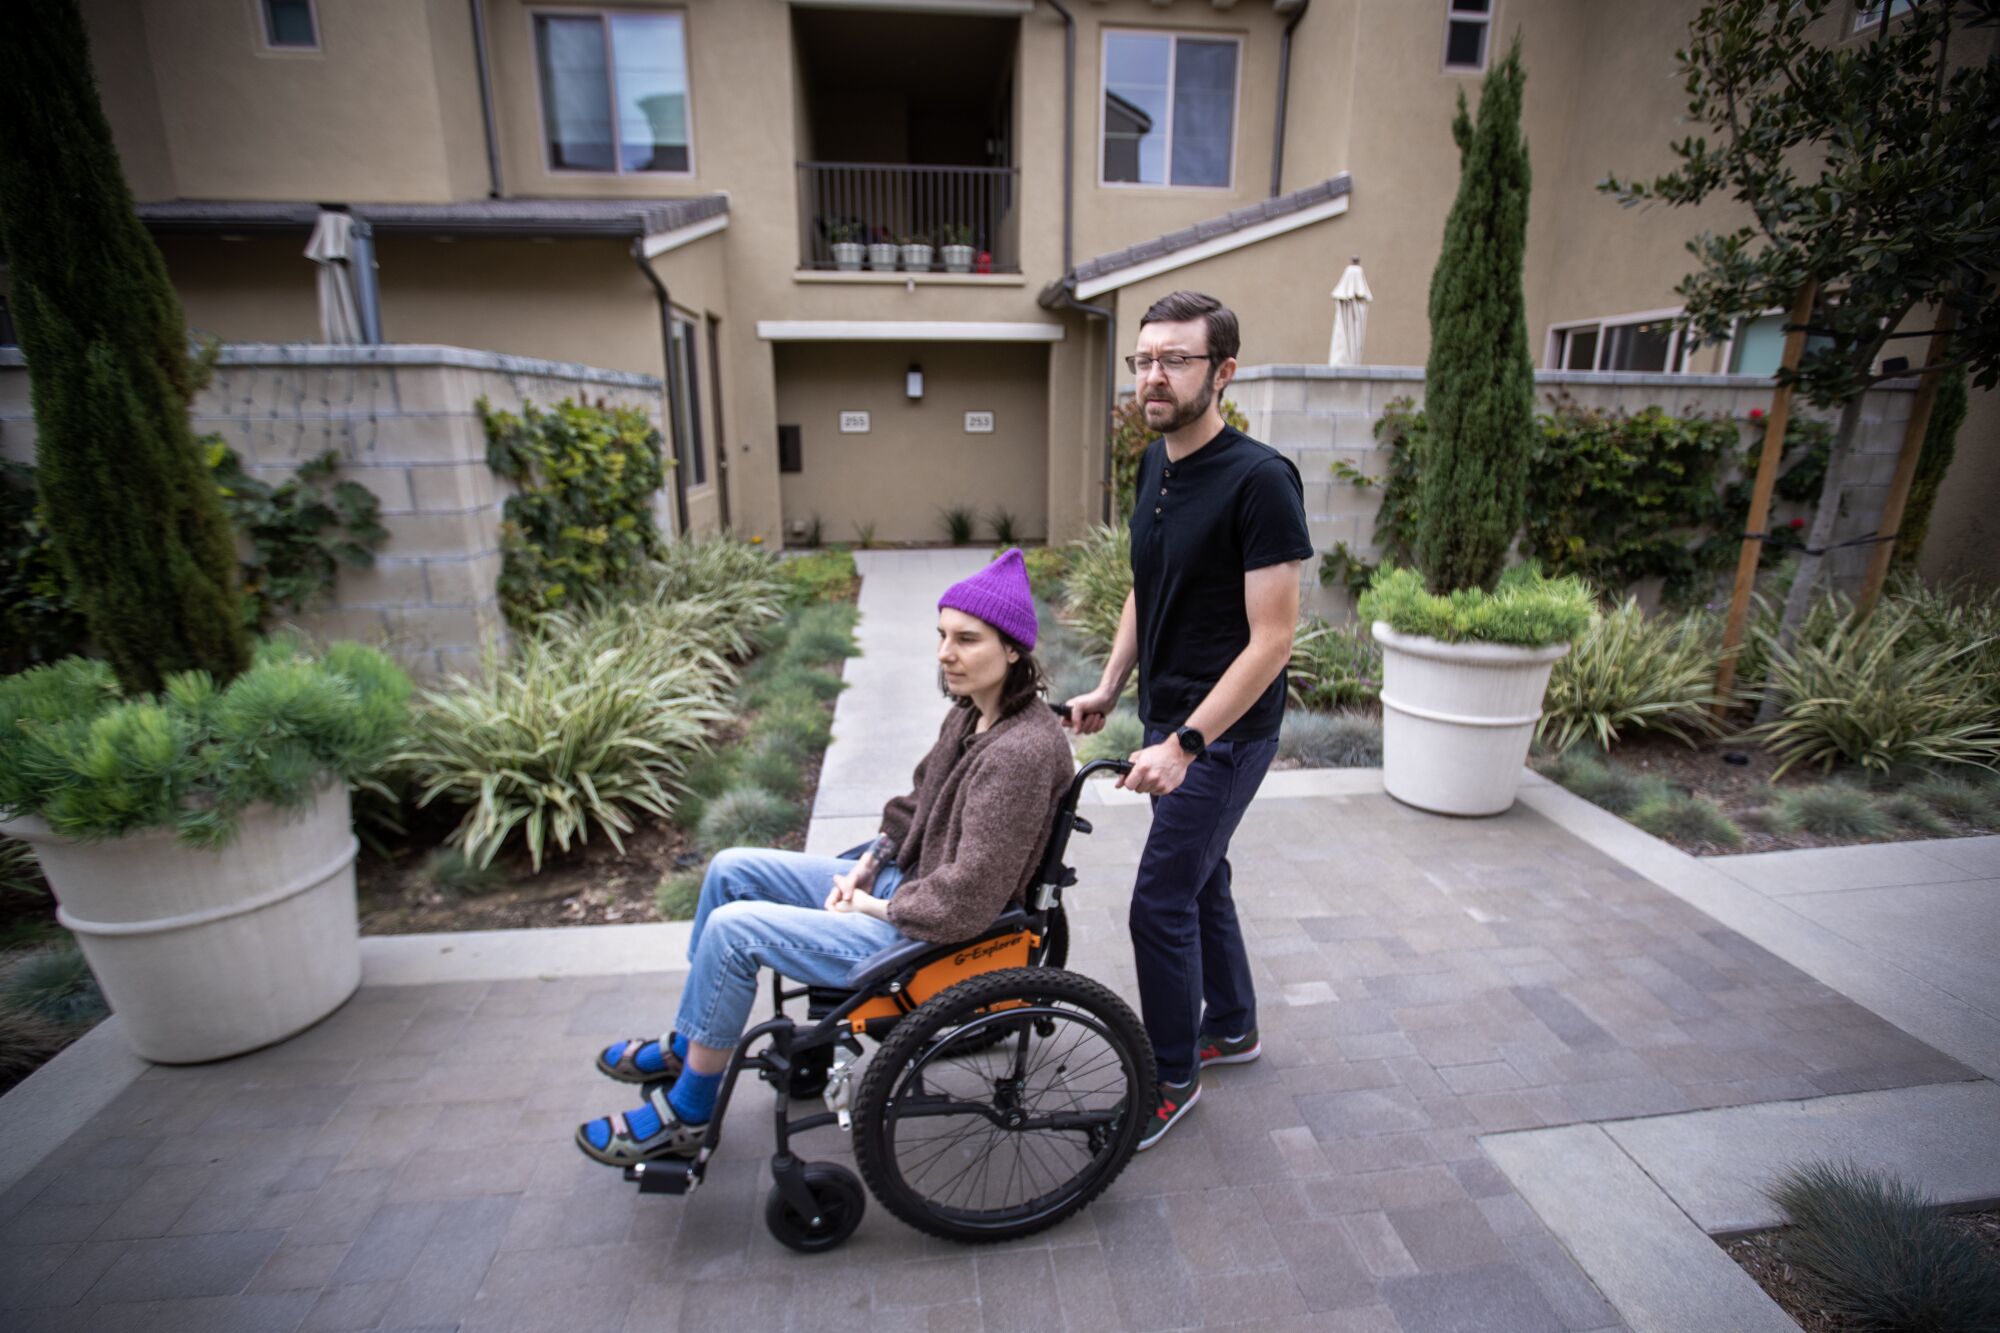 Connor Mayer pushes his partner Courtney Garvin in a wheelchair as they go outside for some fresh air.